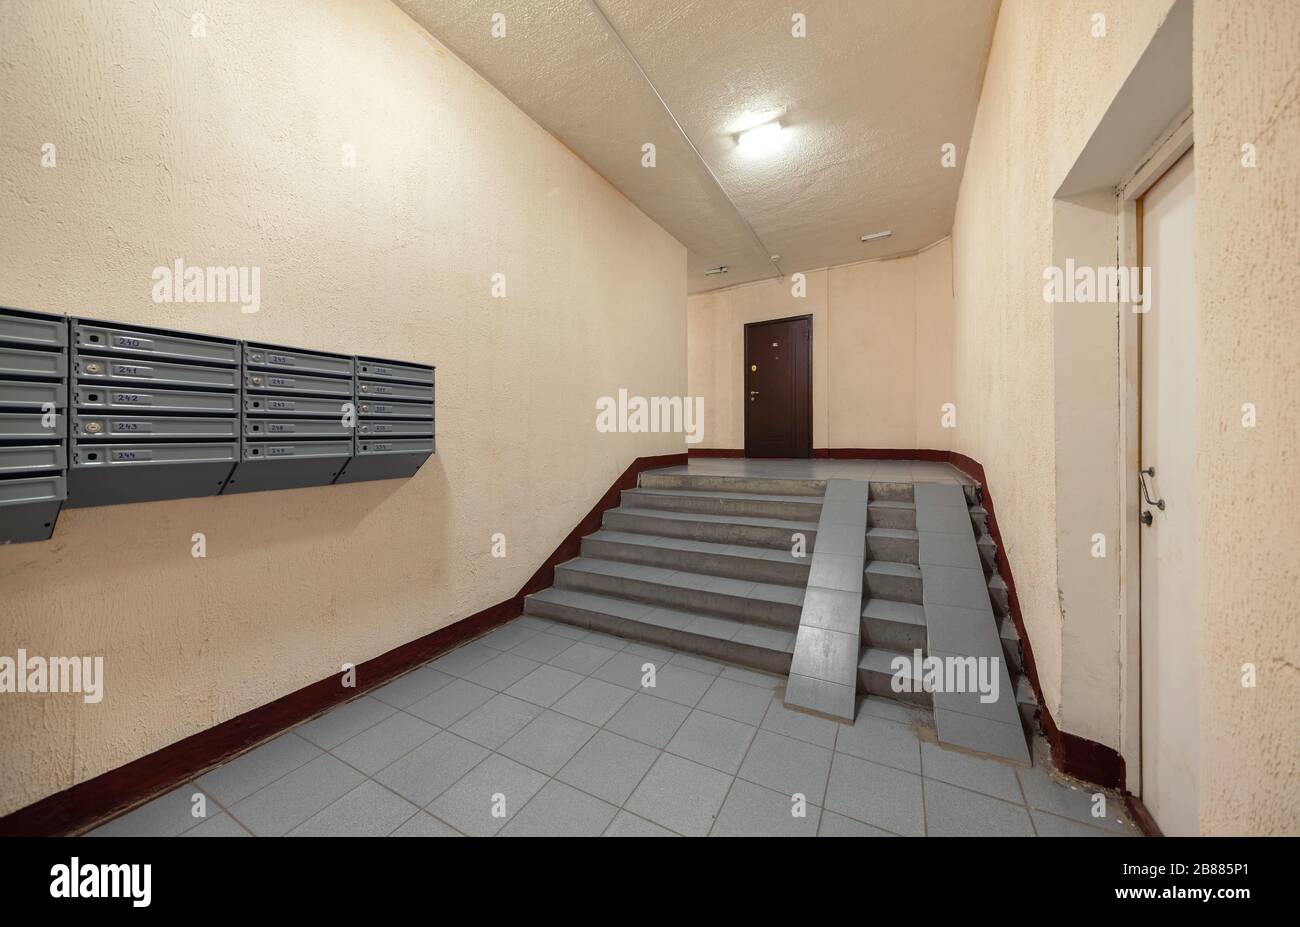 Entrance hallway of an apartment building with mailboxes staircase and wheelchair ramp Stock Photo